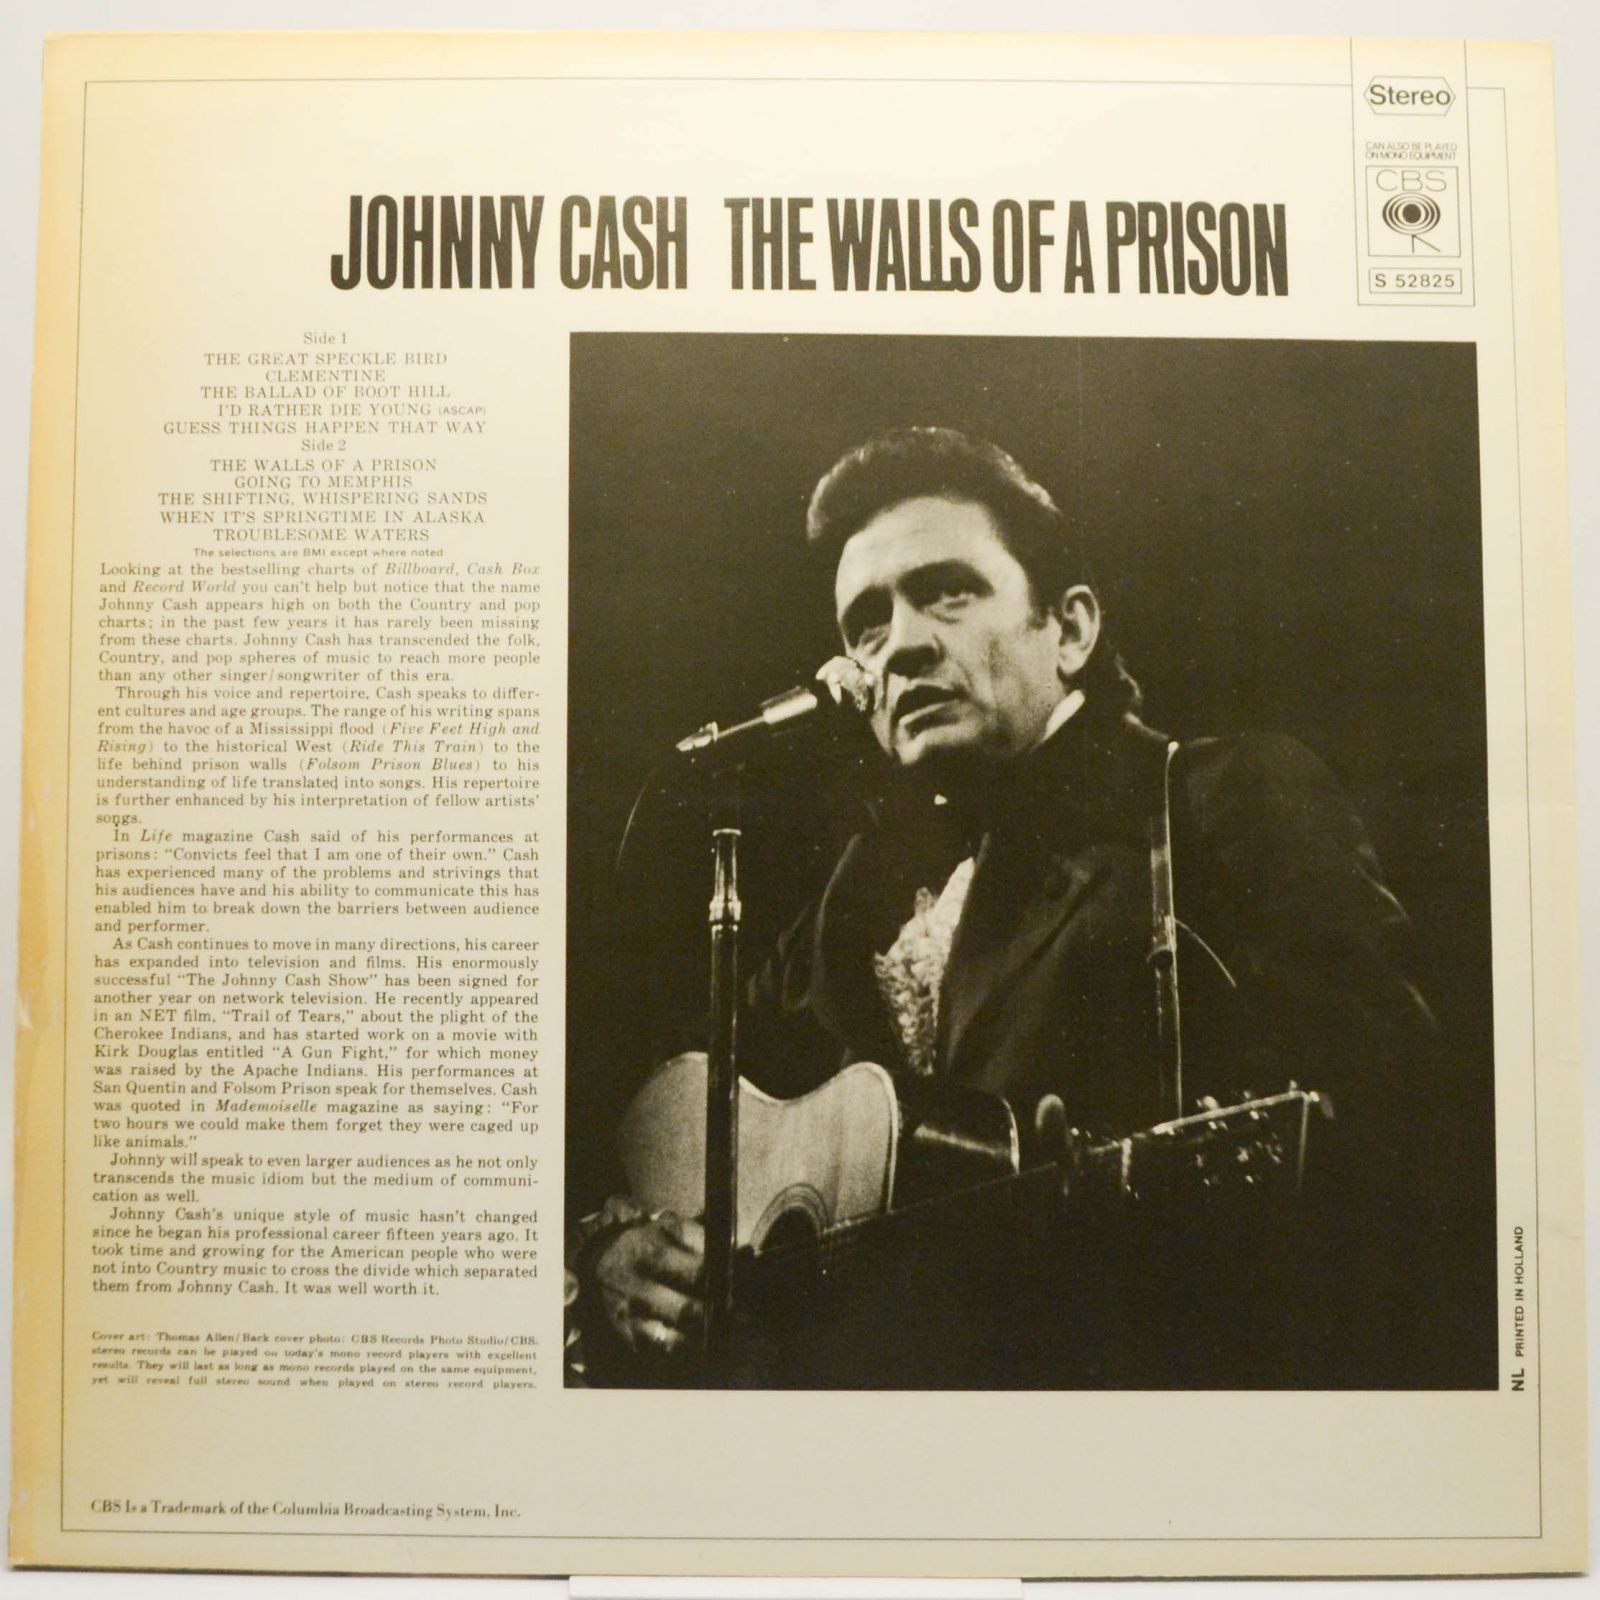 Johnny Cash — The Walls Of A Prison, 1970